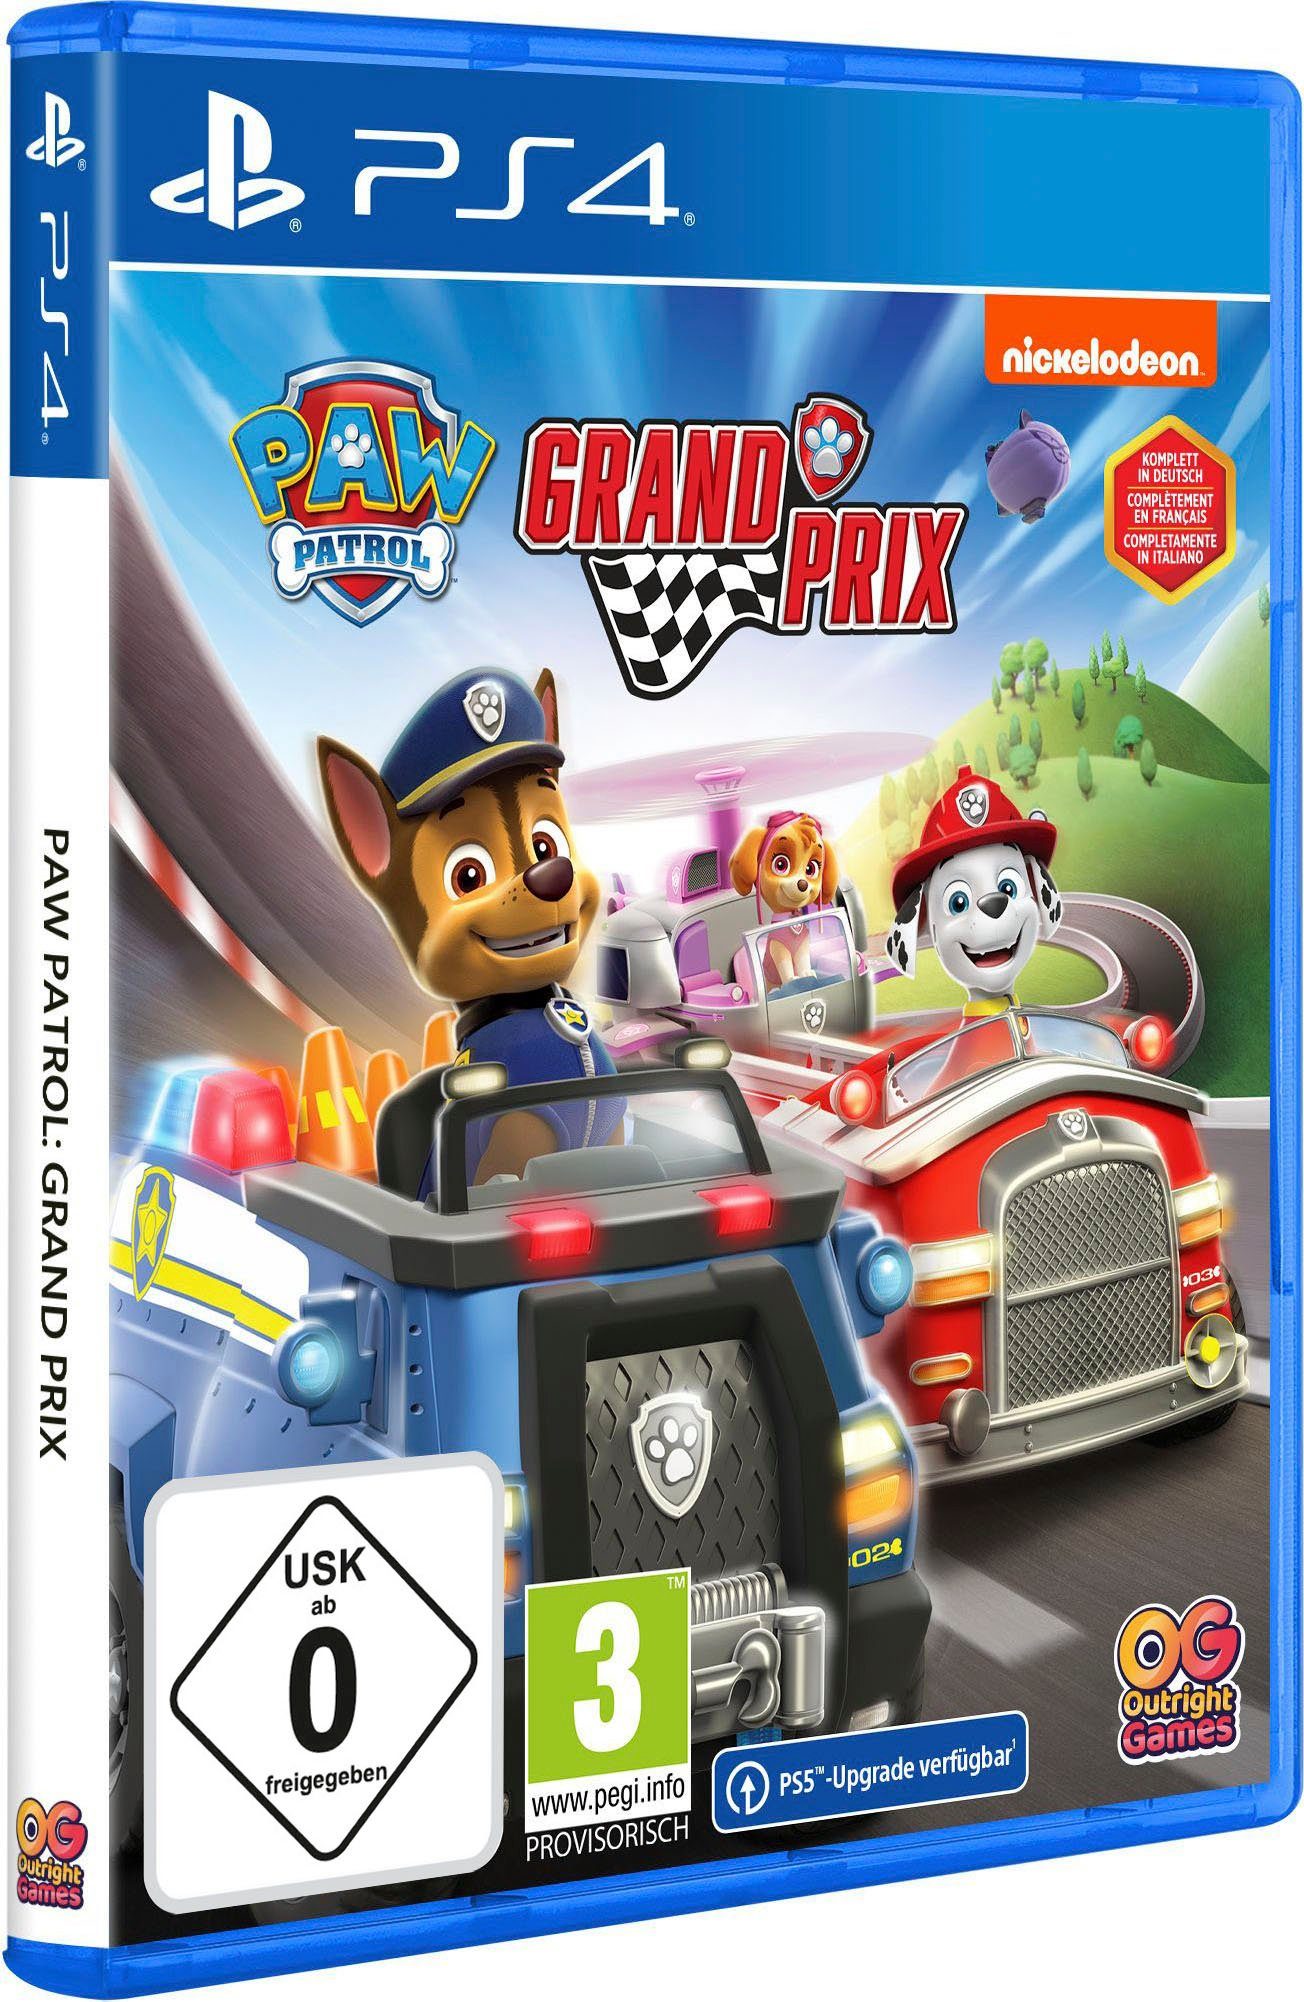 Grand Prix PlayStation Paw Outright Patrol: Games 4